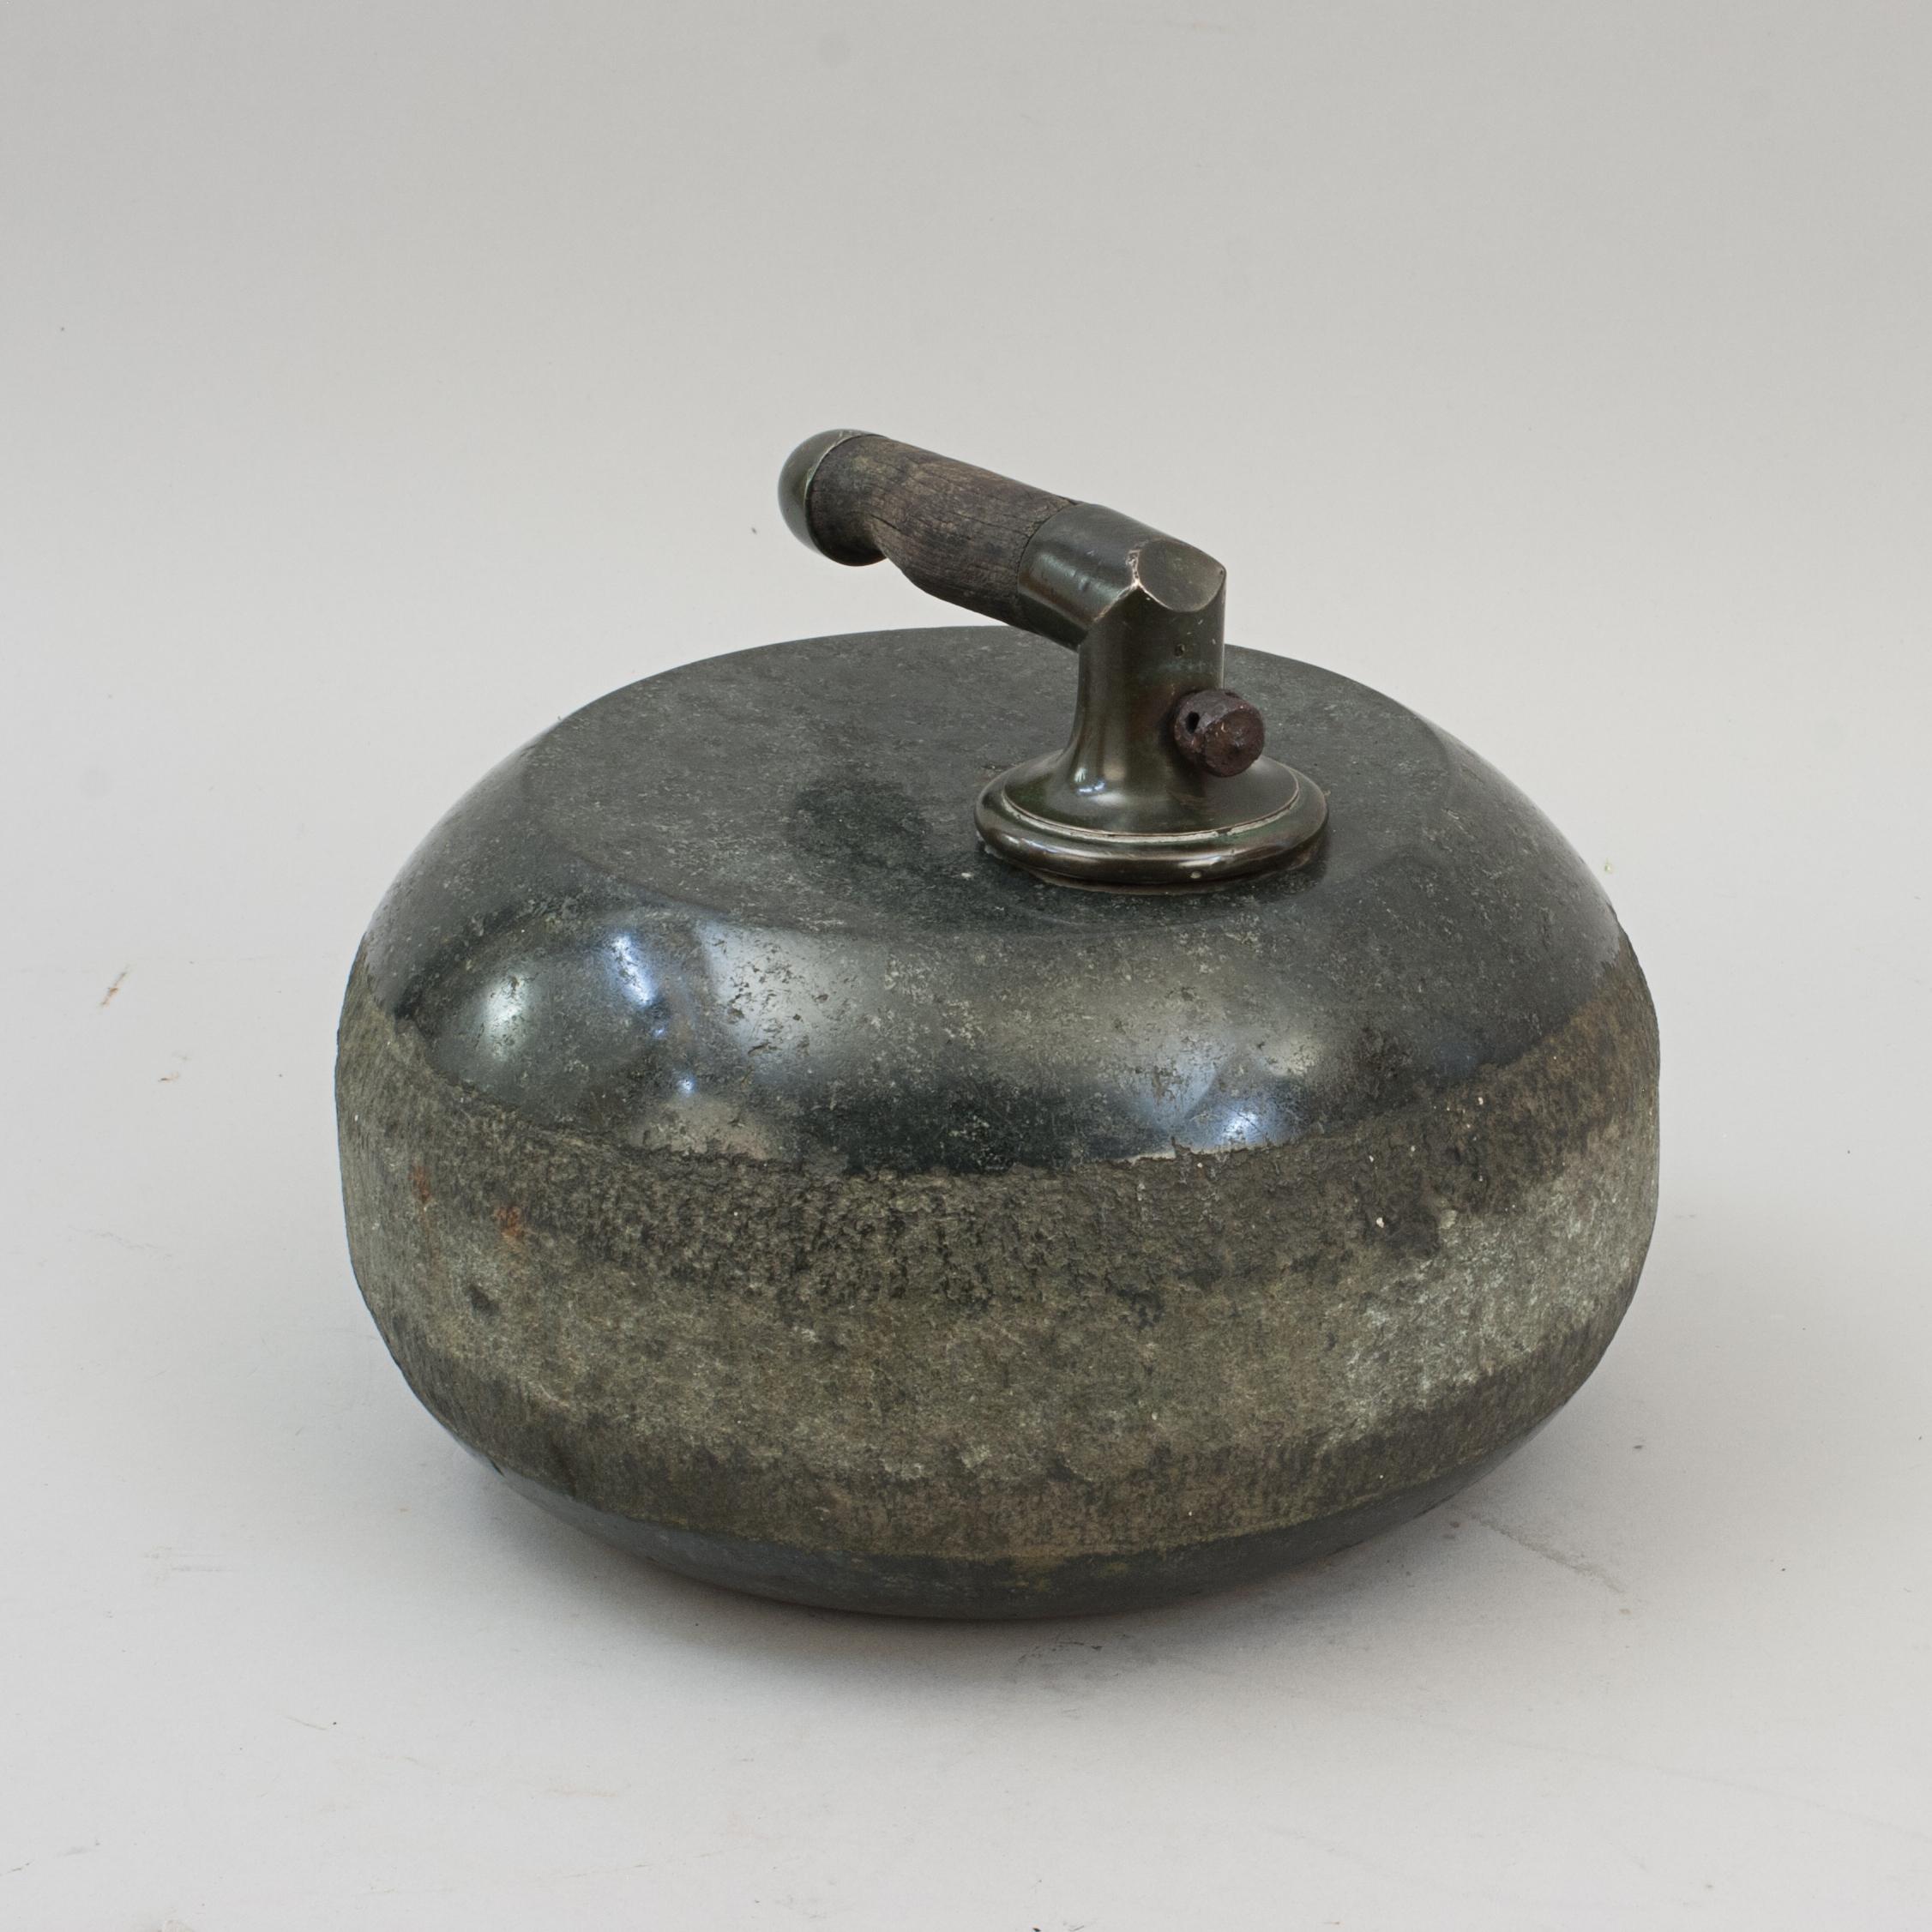 Antique Granite Curling Stone.
A late 19th century single-soled curling stone with a brass (gun metal) and wood handle. The handle is fixed to a bar that is set into the top of the stone.

The stone is 25 cm in diameter and 14 cm high with out the